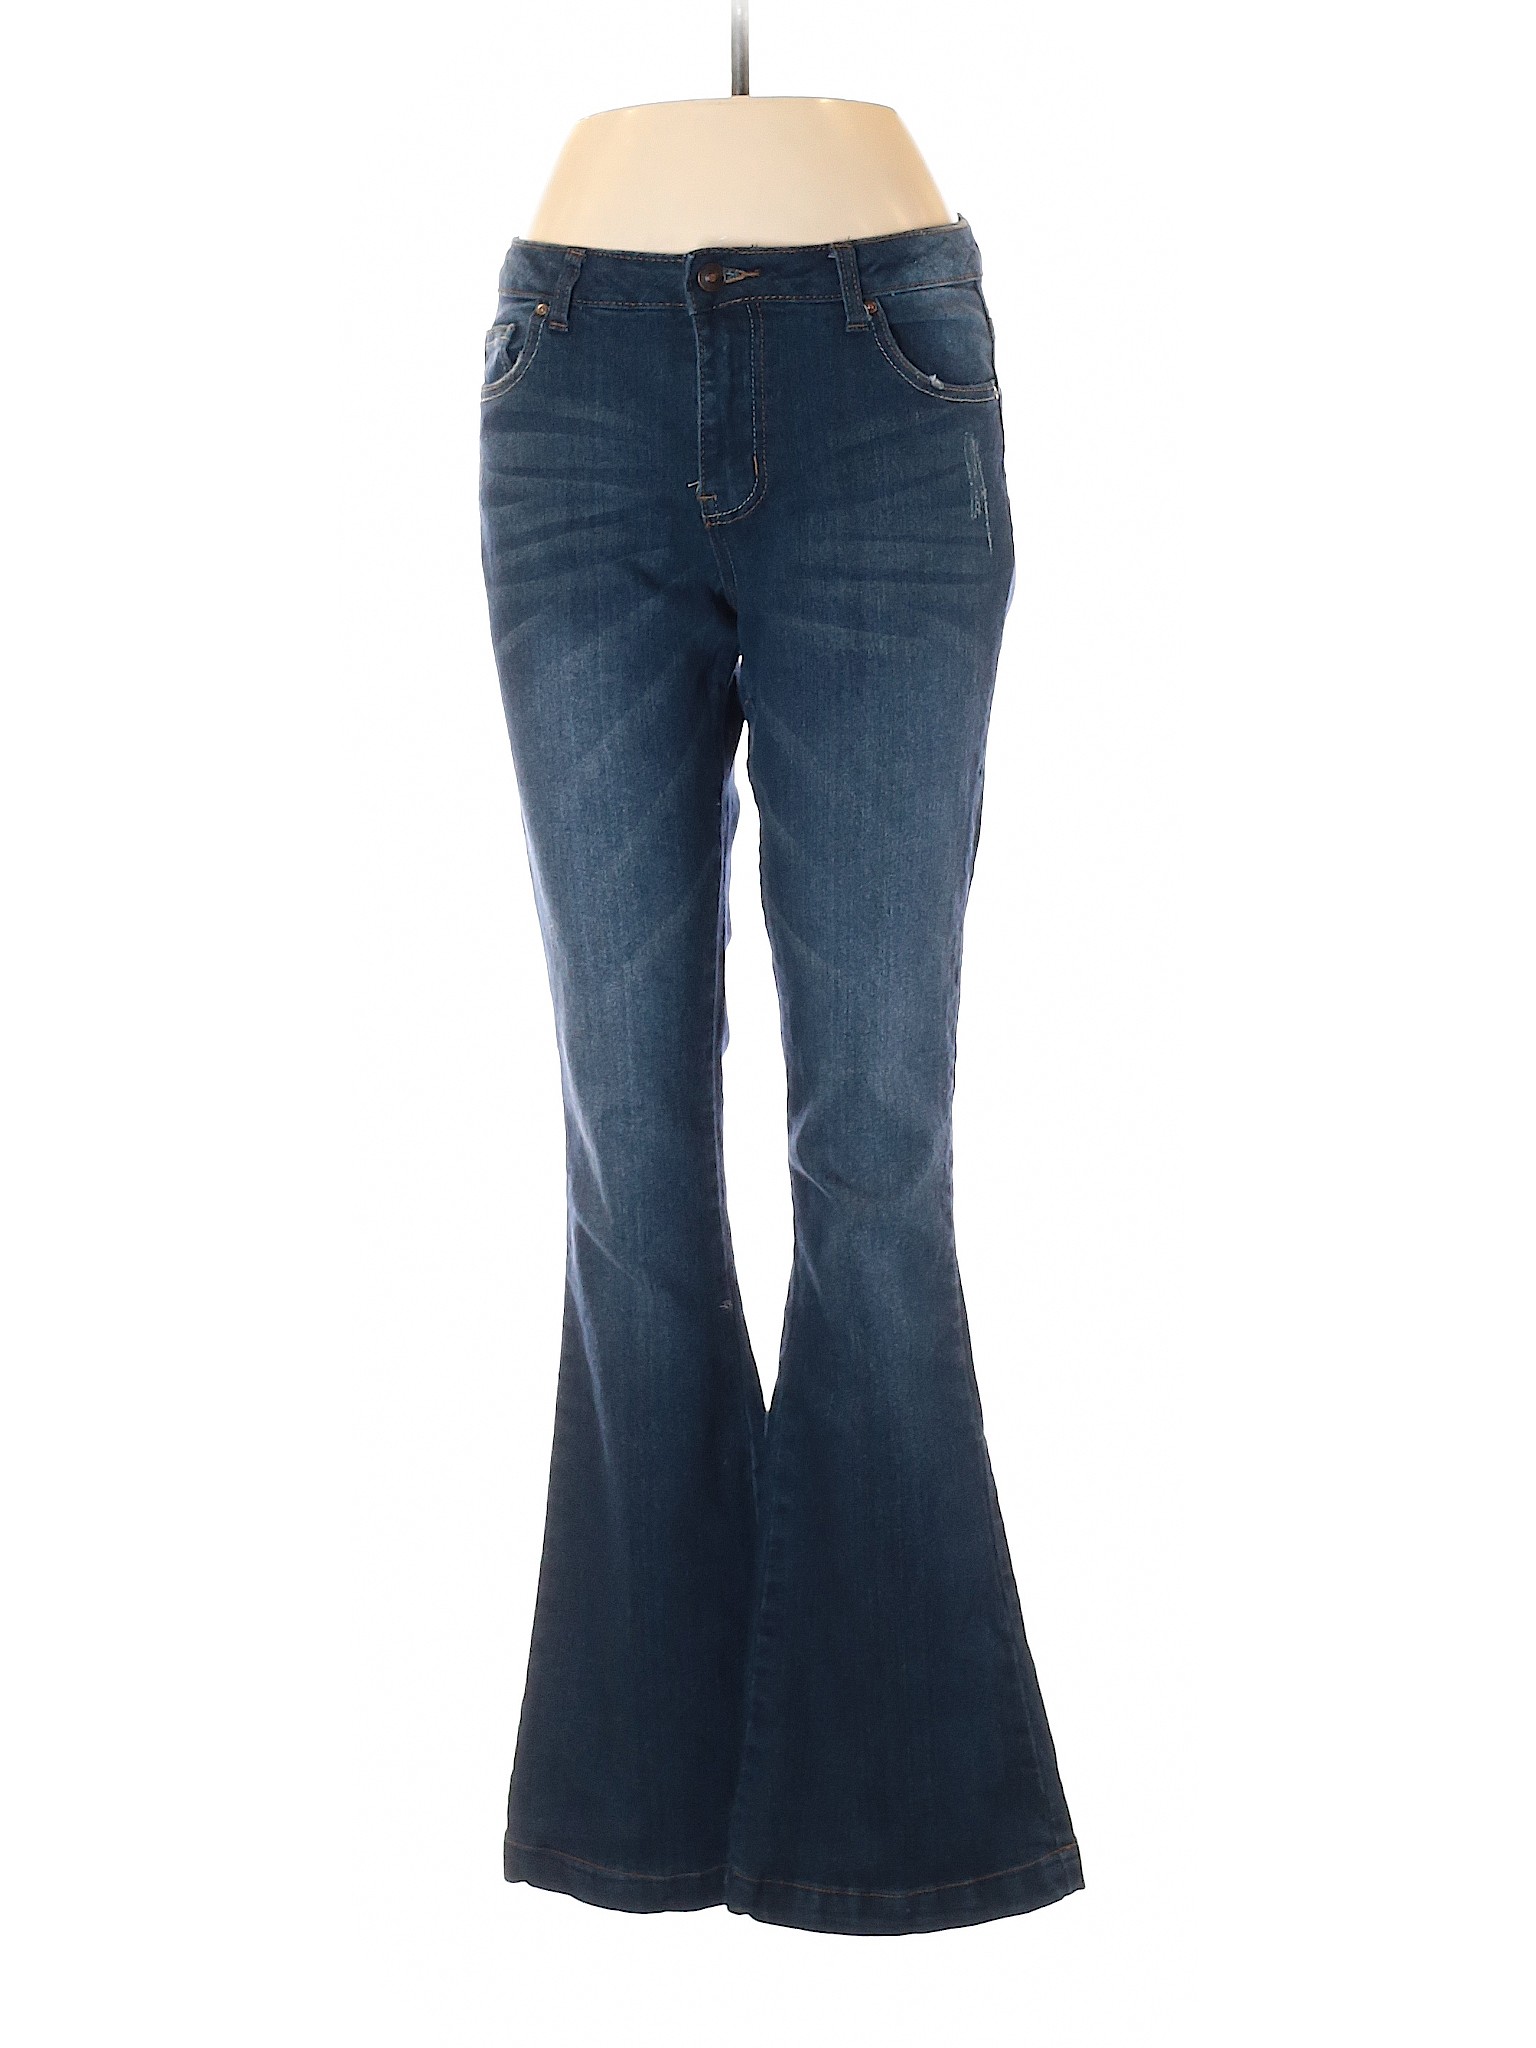 Alloy Solid Blue Jeans Size 9 - 69% off | thredUP